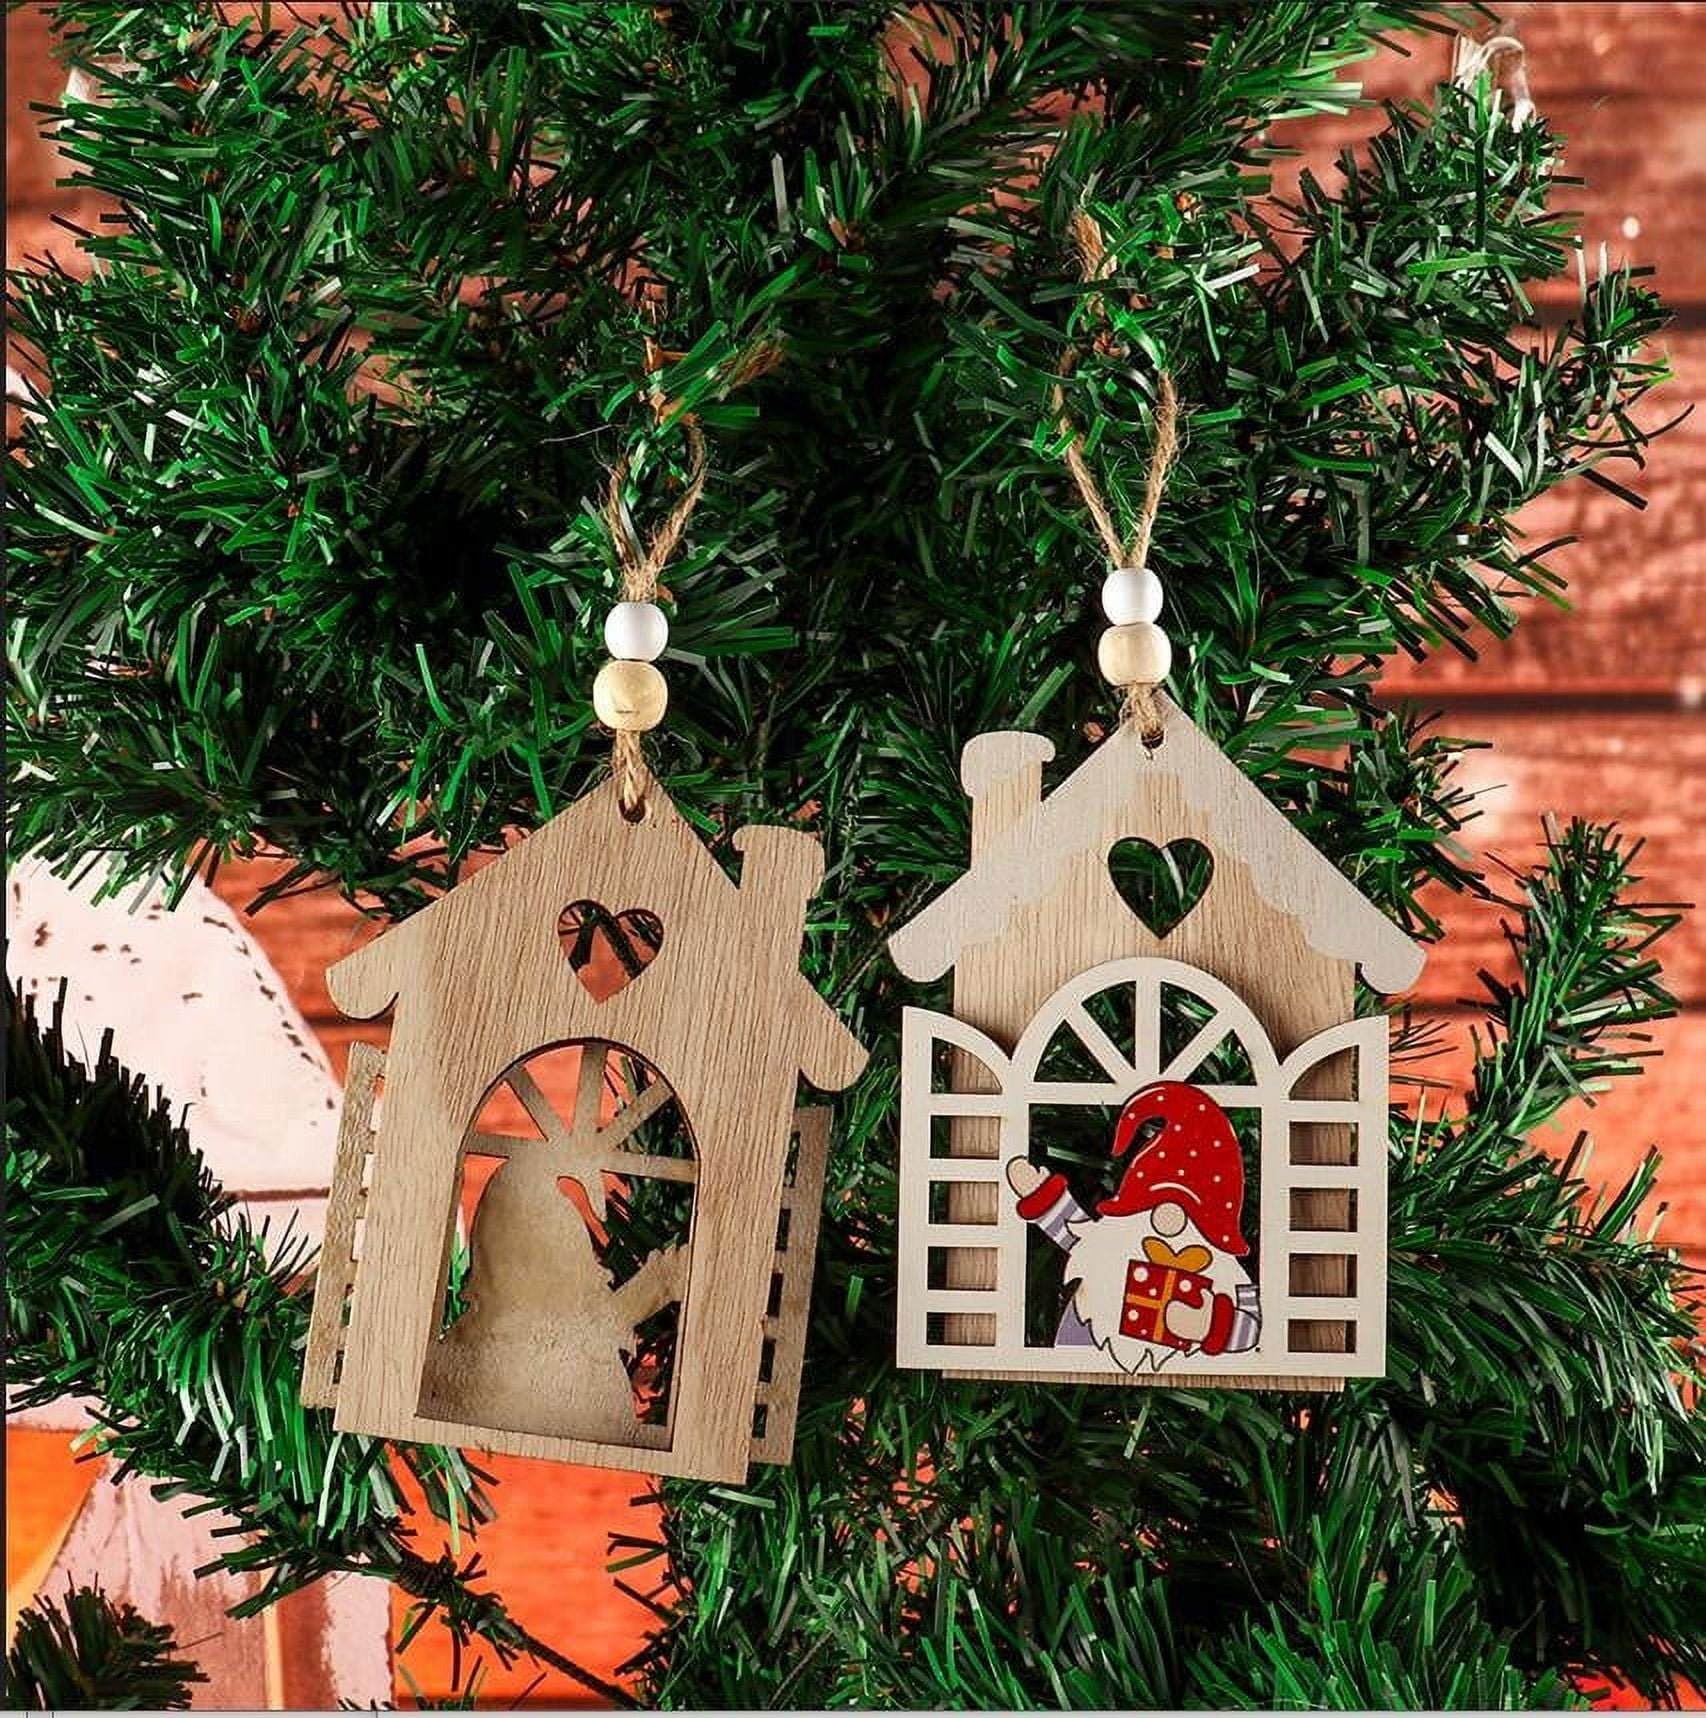 RBCKVXZ Christmas Decorations Under $5.00 Clearance,Wooden